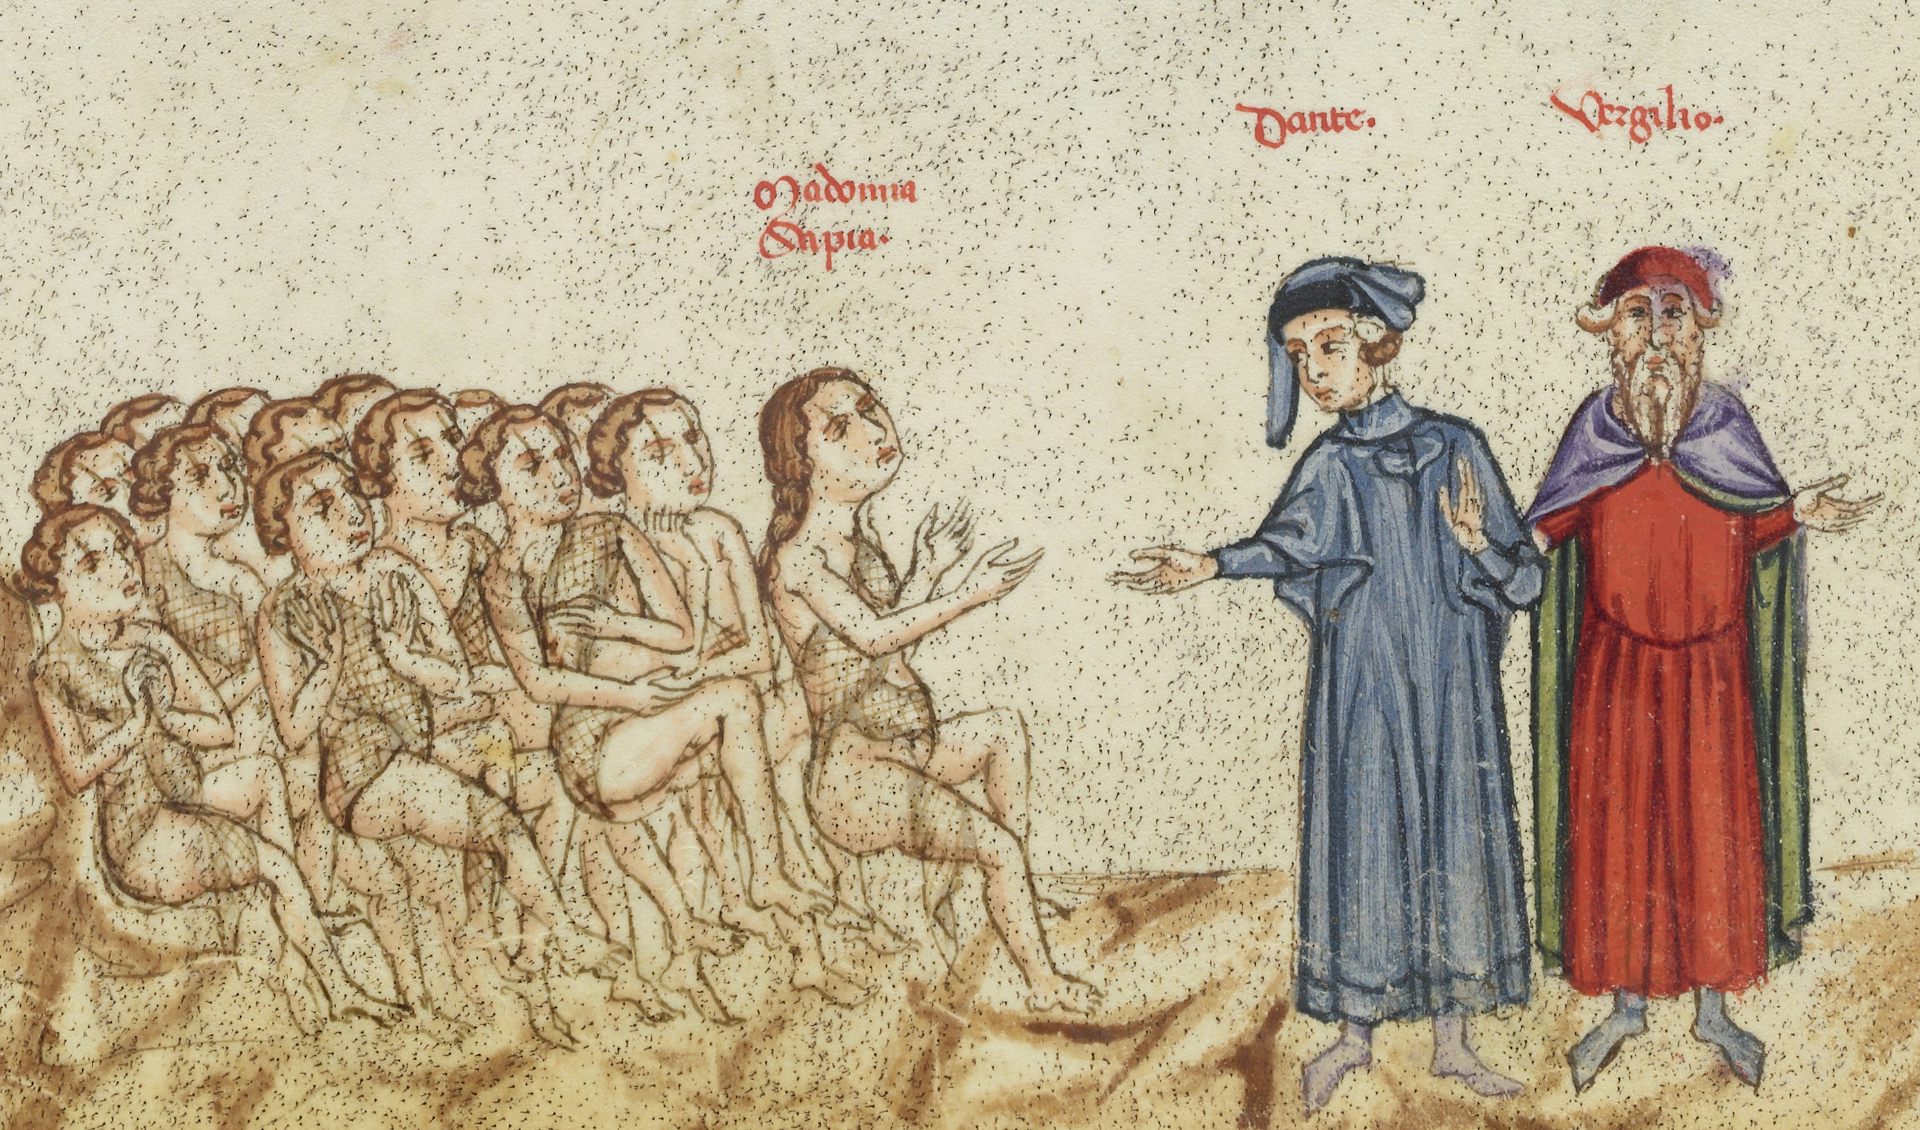 The Women Who Appear in Dante’s ‘Divine Comedy’ Are Finally Getting Their Due, 700 Years Later